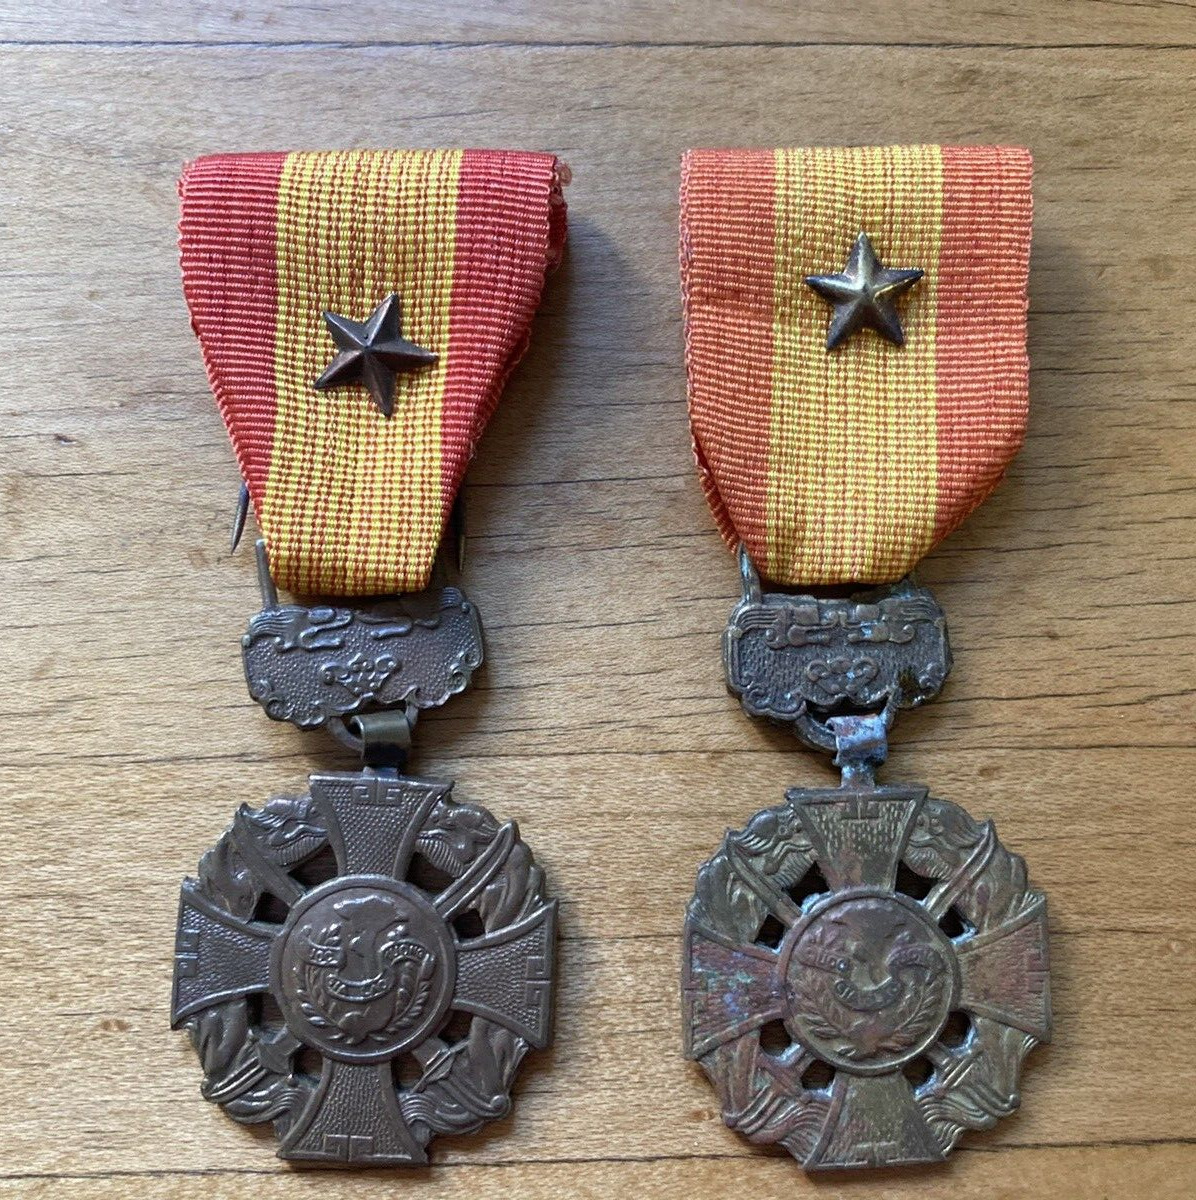 VIETNAM REPUBLIC WAR GALLANTRY CROSS MEDAL with STAR-2 MEDALS-THEATRE MADE